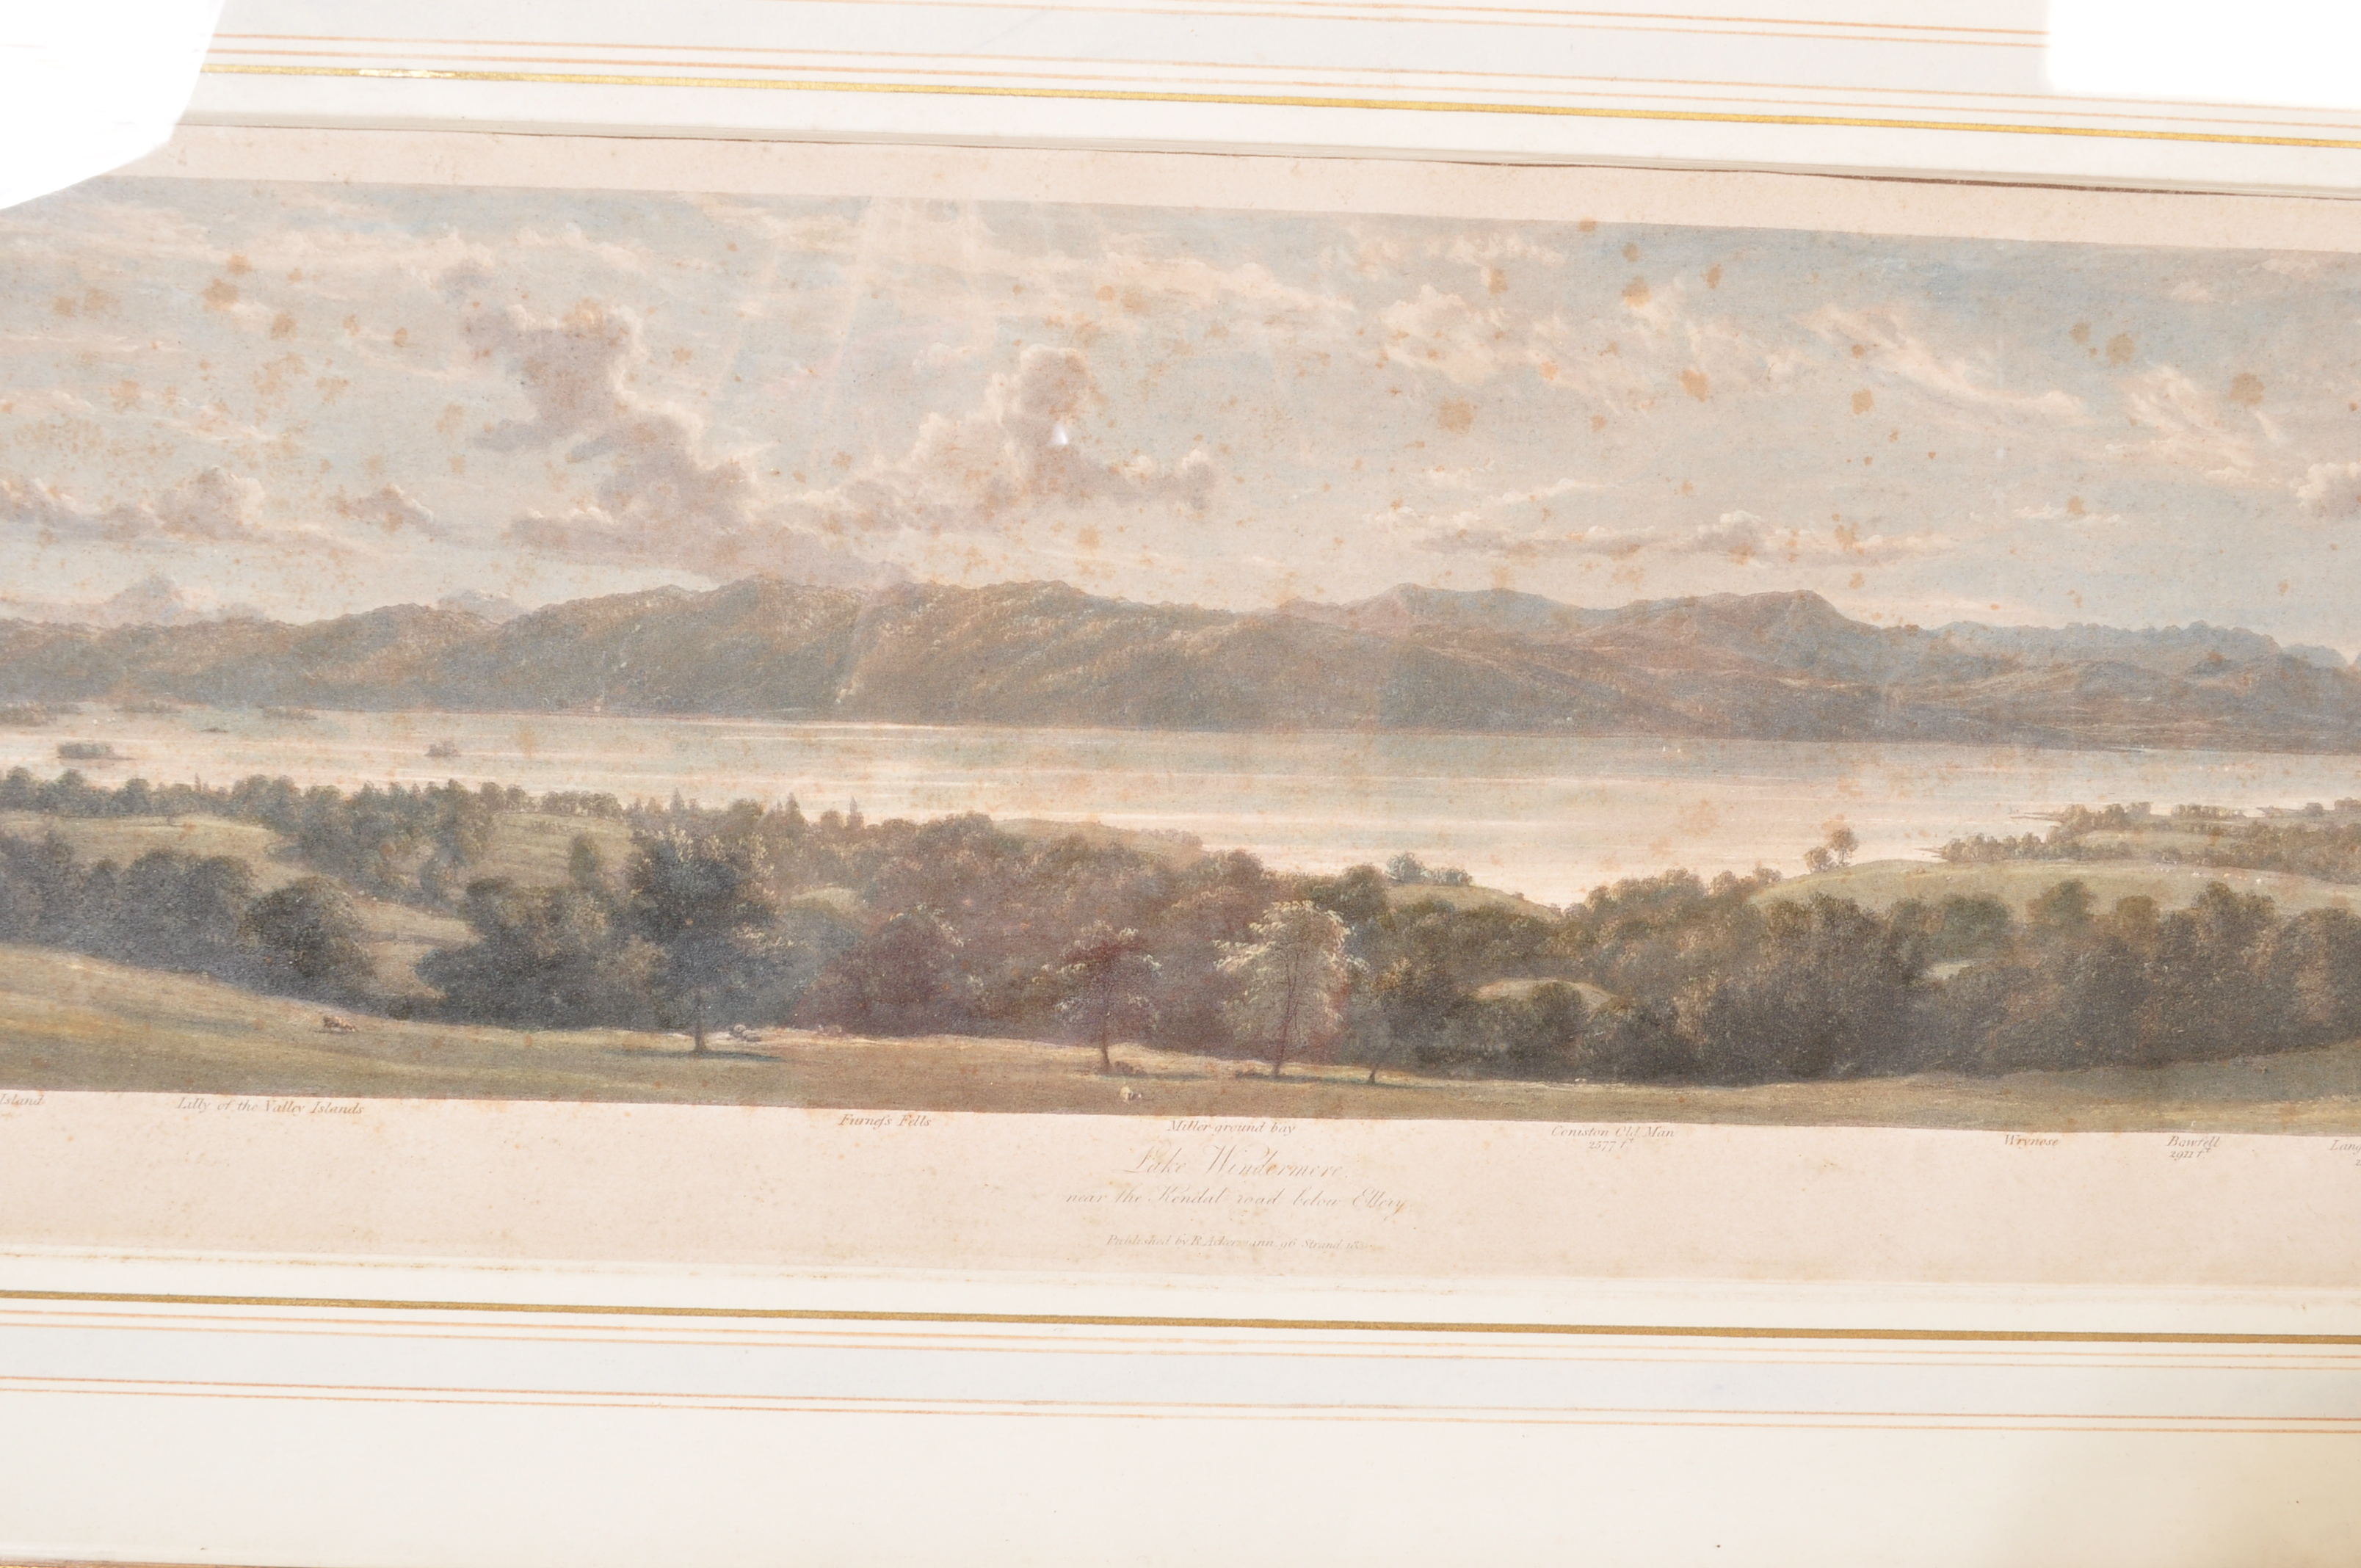 W WESTALL THREE 19TH CENTURY COLOUR ENGRAVINGS OF LAKE DISTRICT - Image 7 of 11